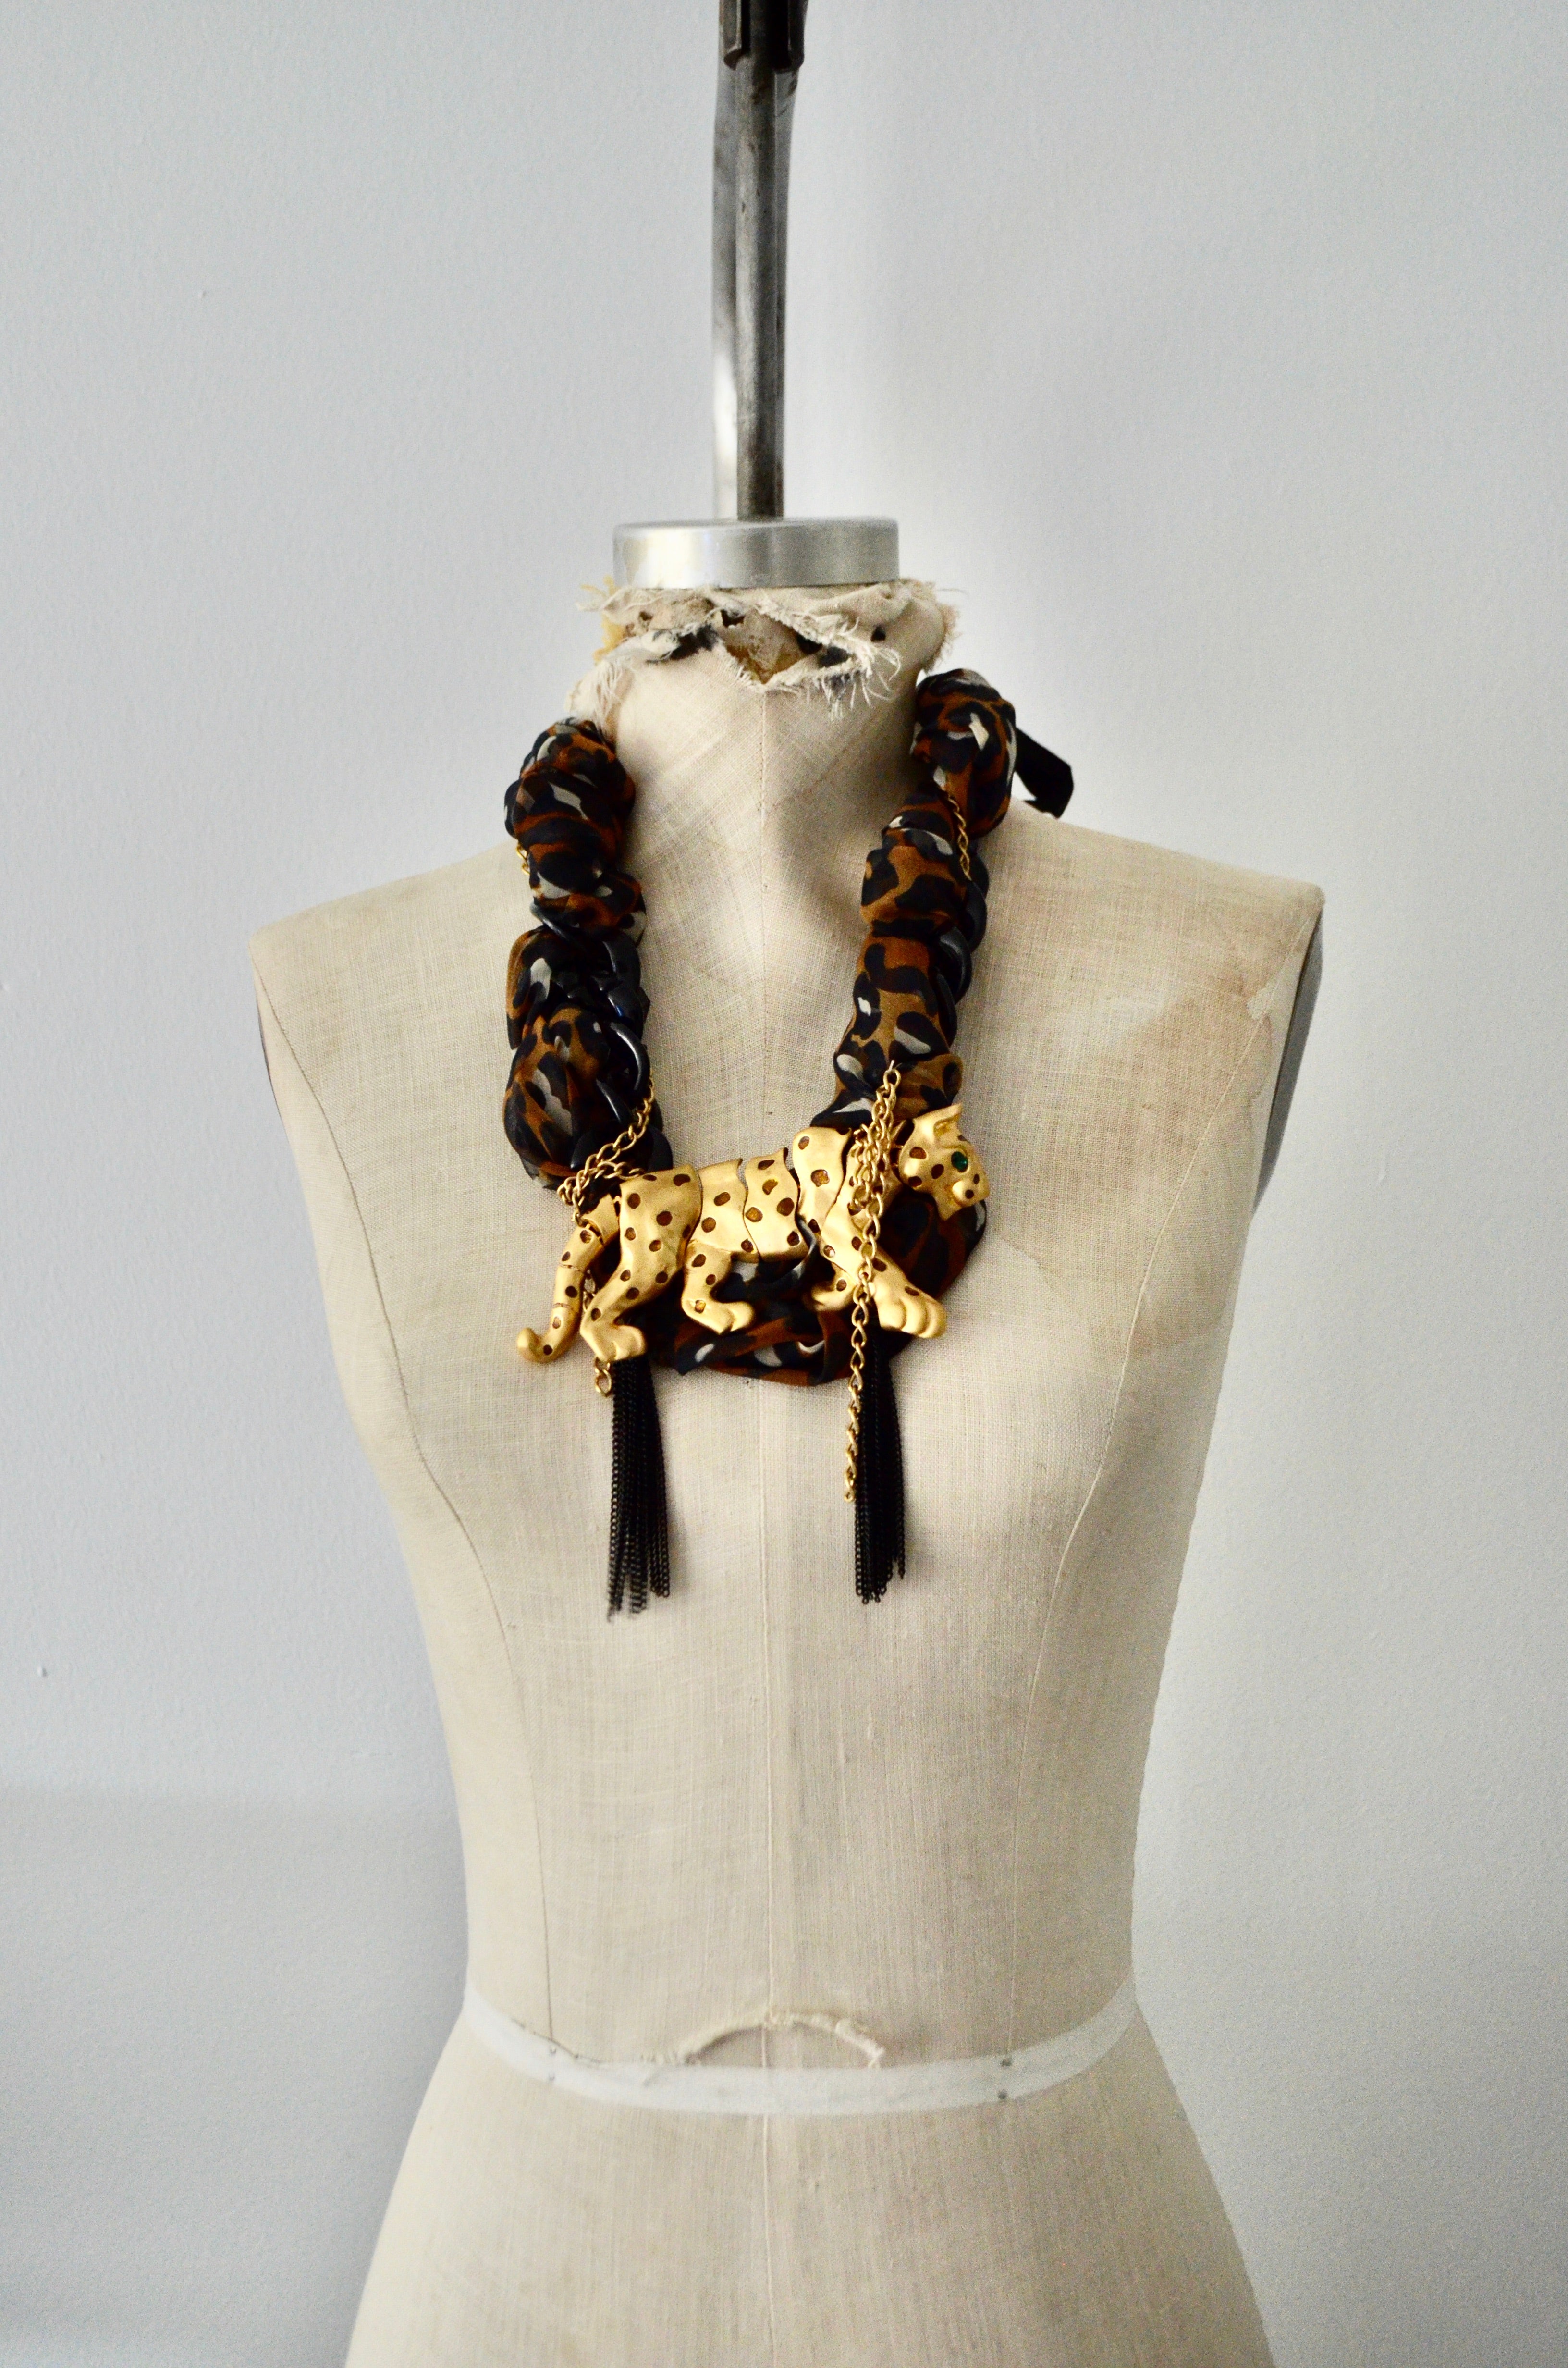 Articulated Leopard Pendant Necklace Scarf Black Acrylic Link Chain and Tassels